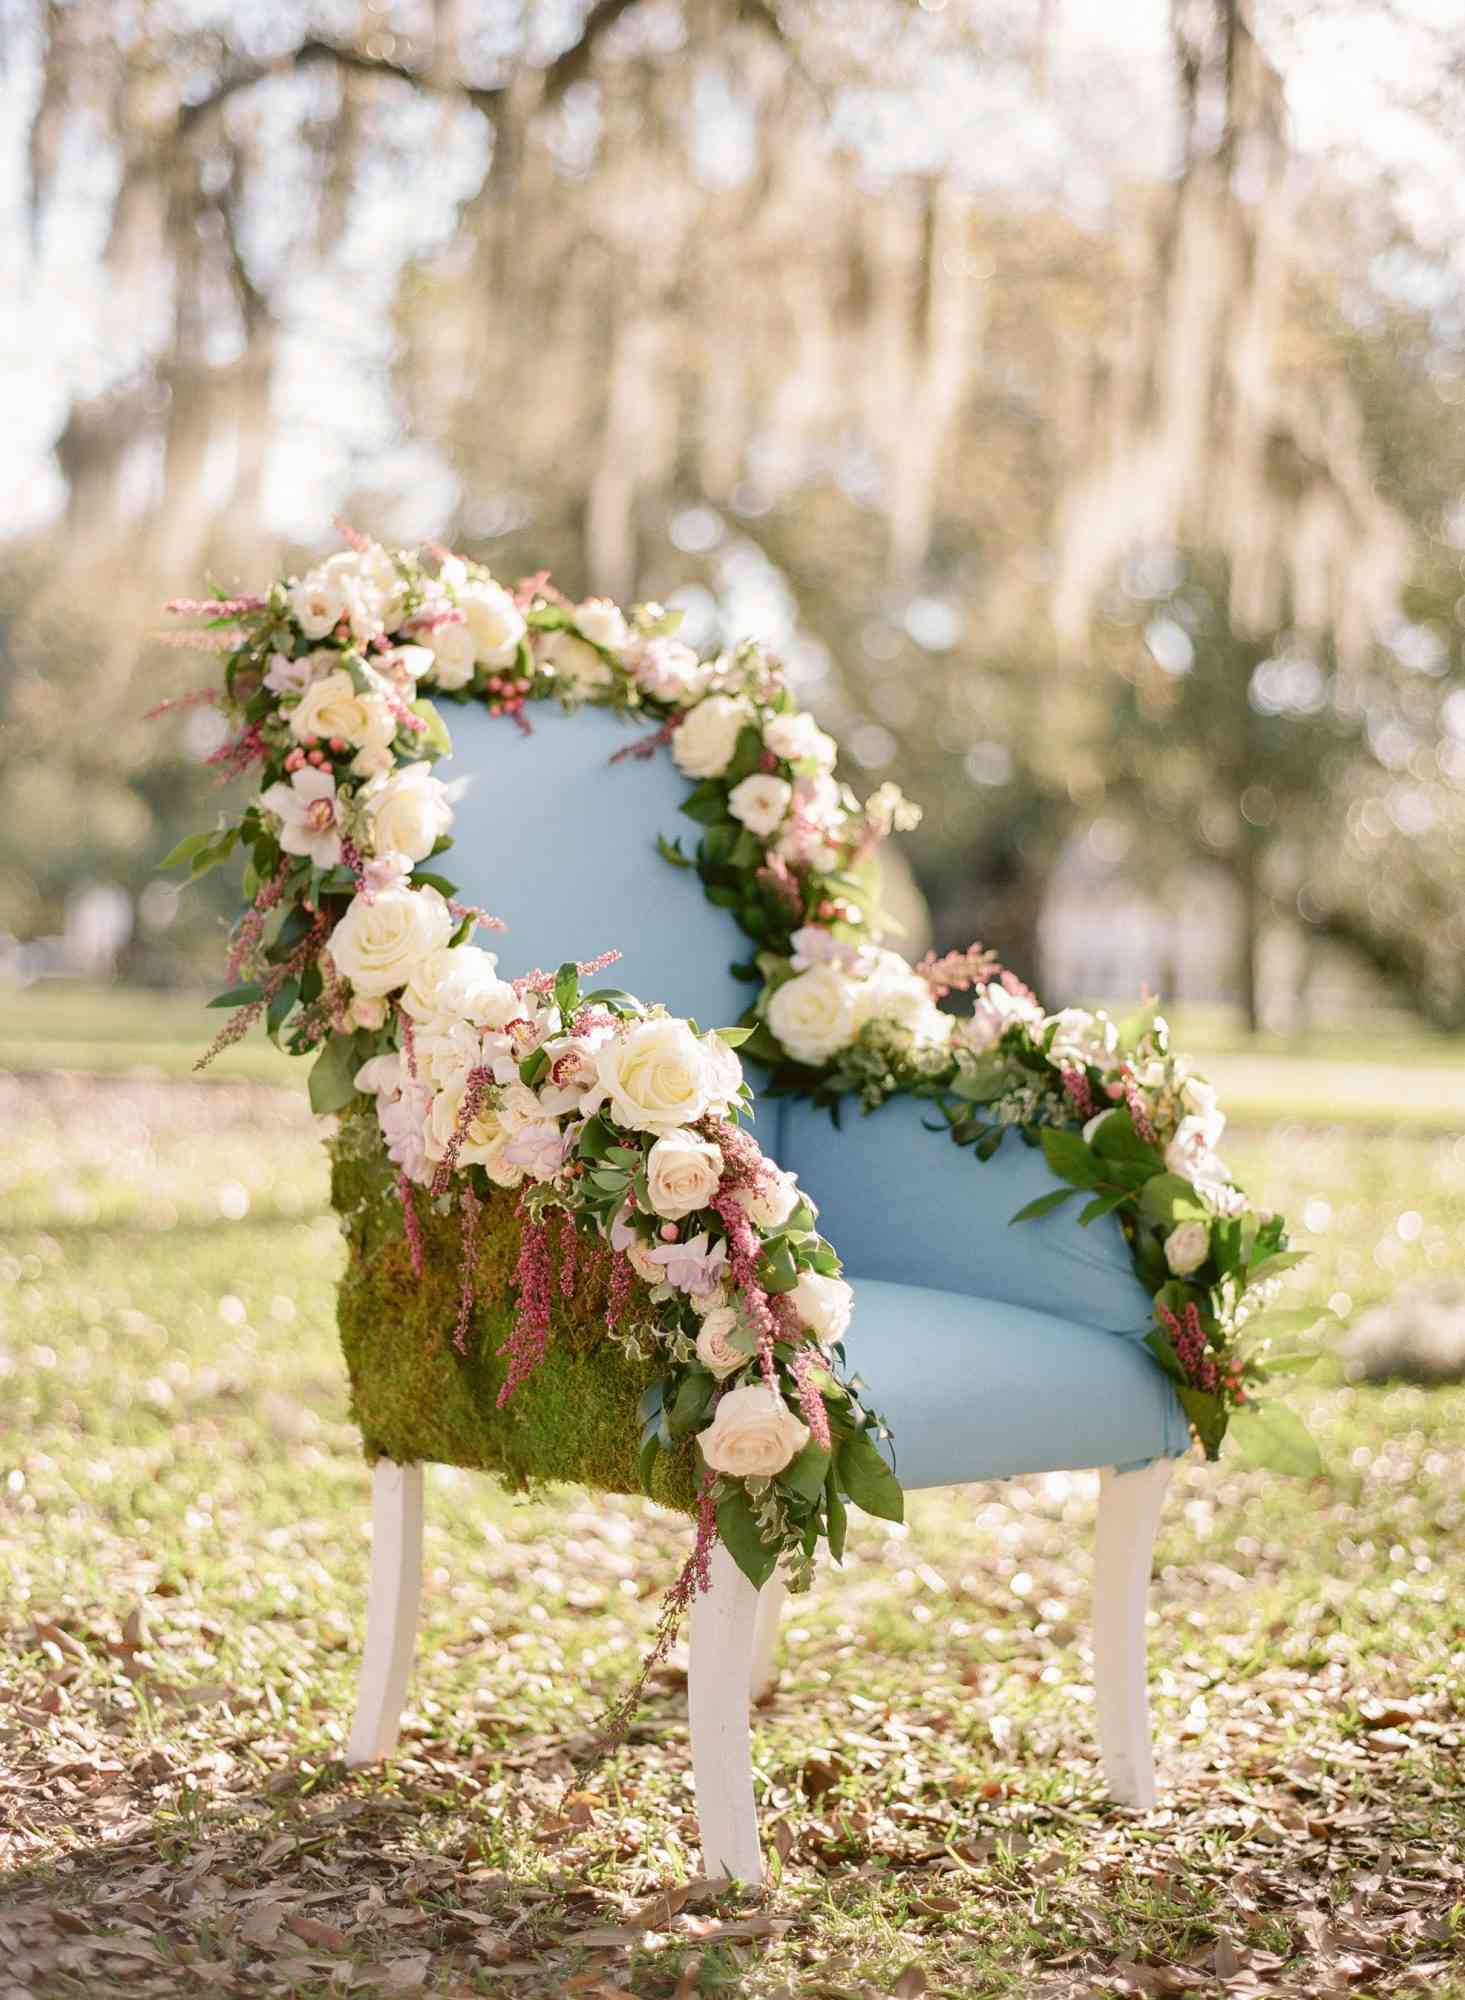 plan bridal shower - bride seat of honour decorated with flowers